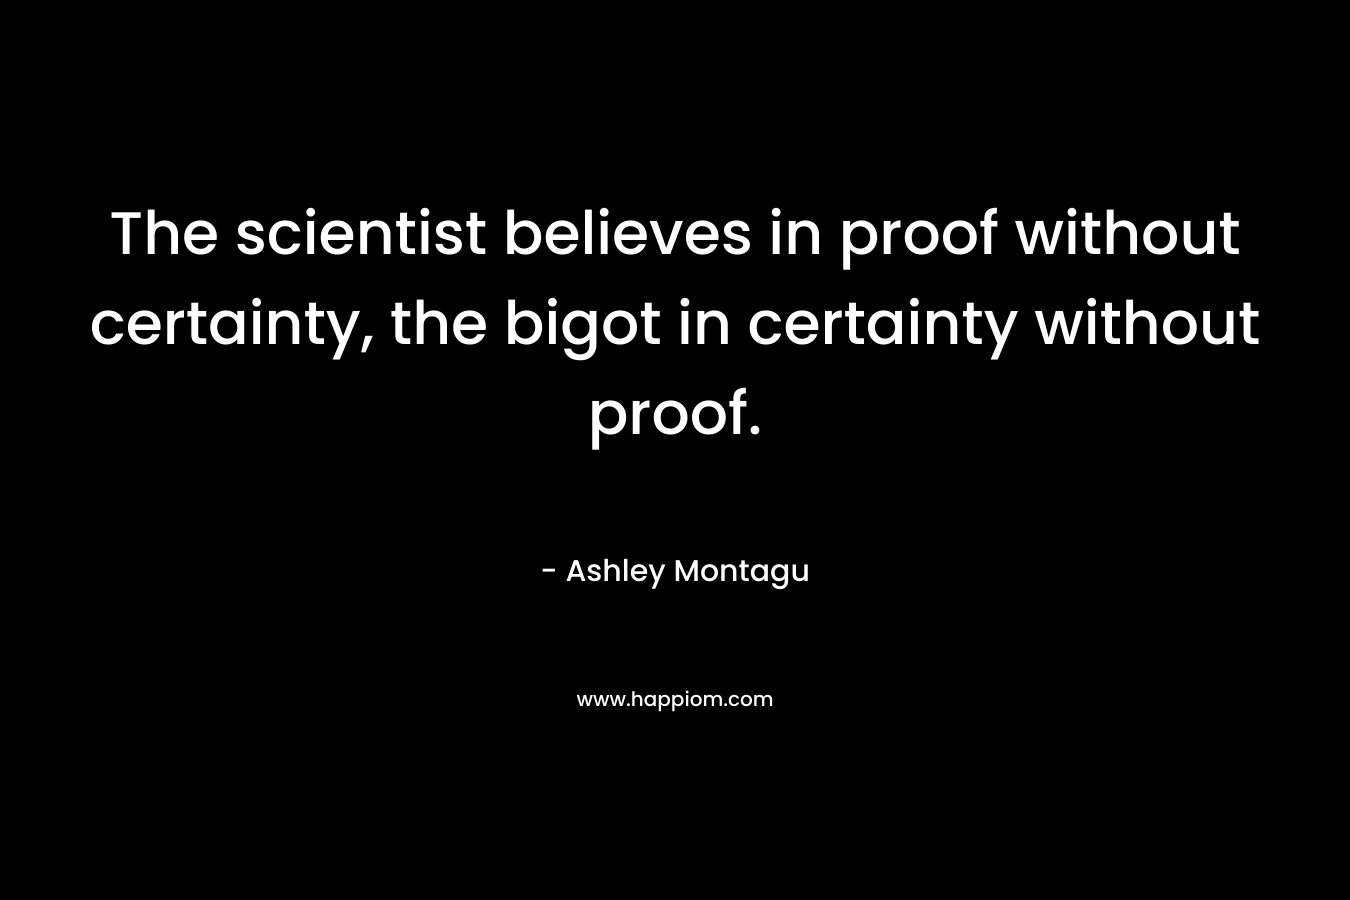 The scientist believes in proof without certainty, the bigot in certainty without proof.